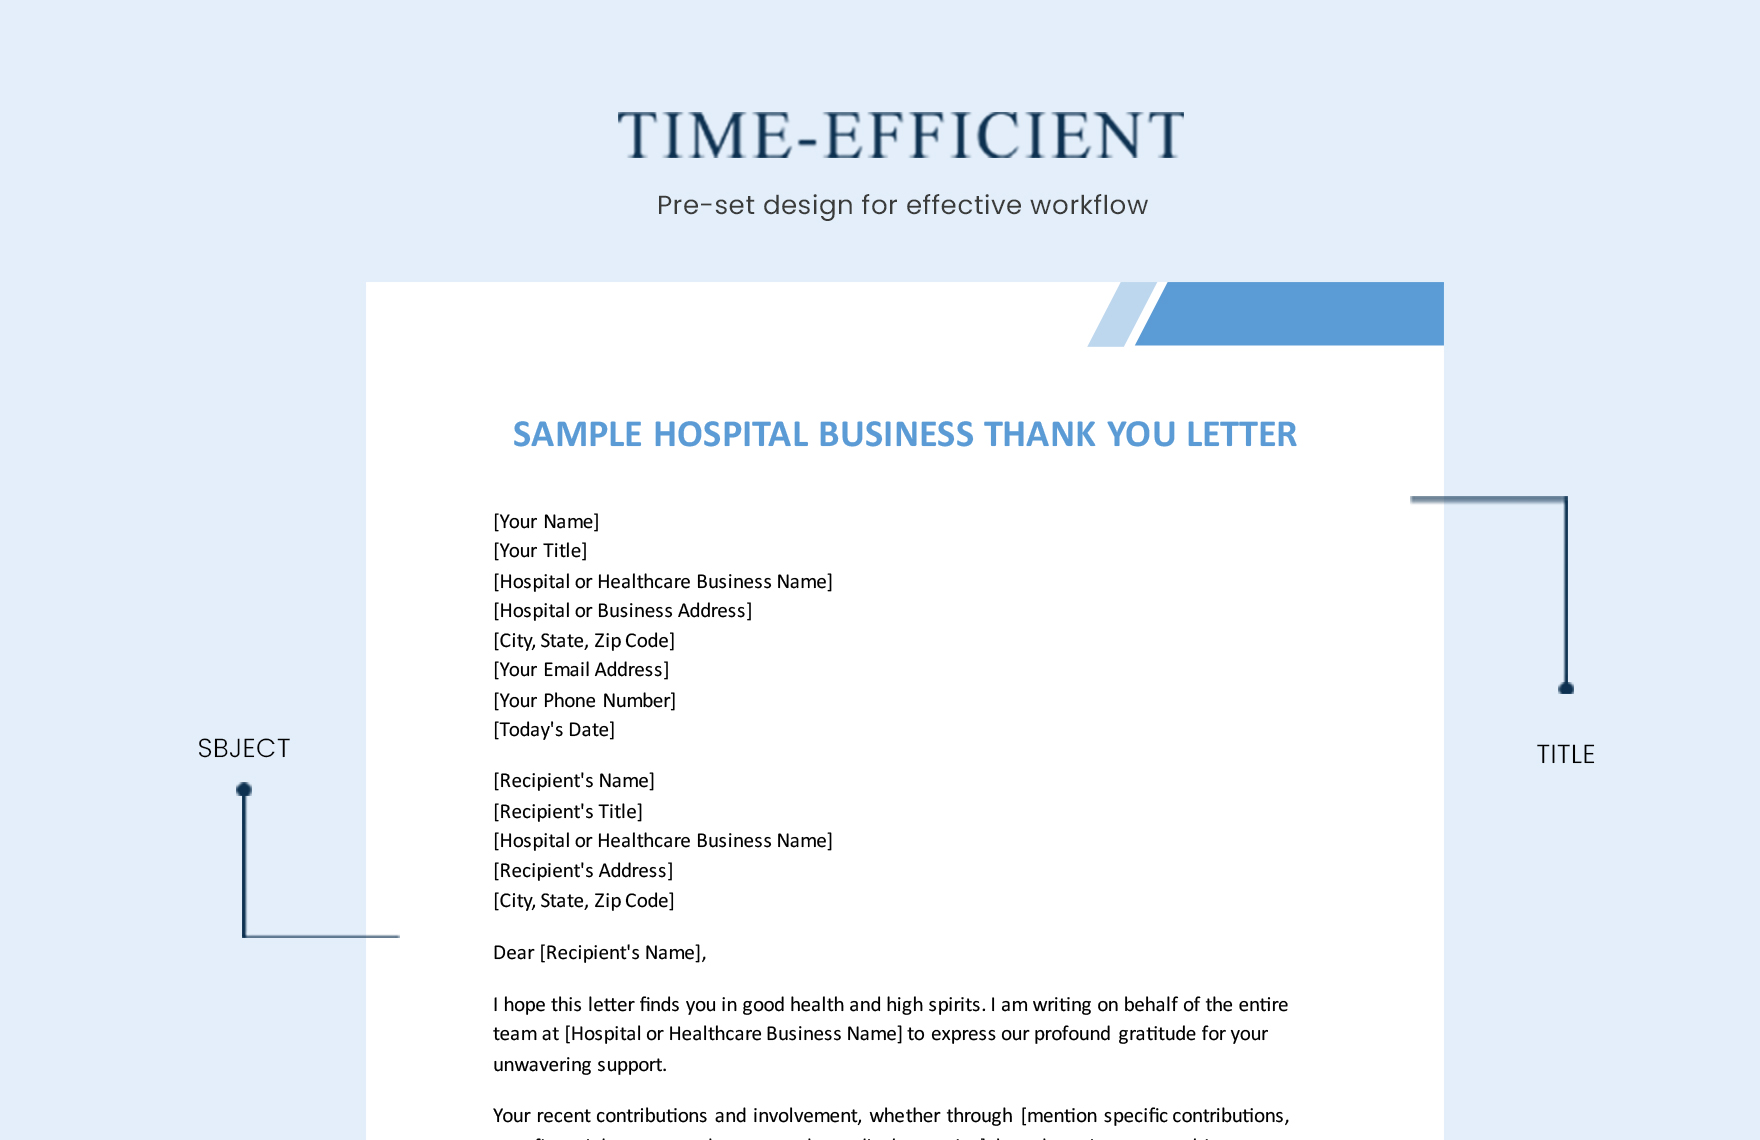 Sample Hospital Business Thank You Letter Template